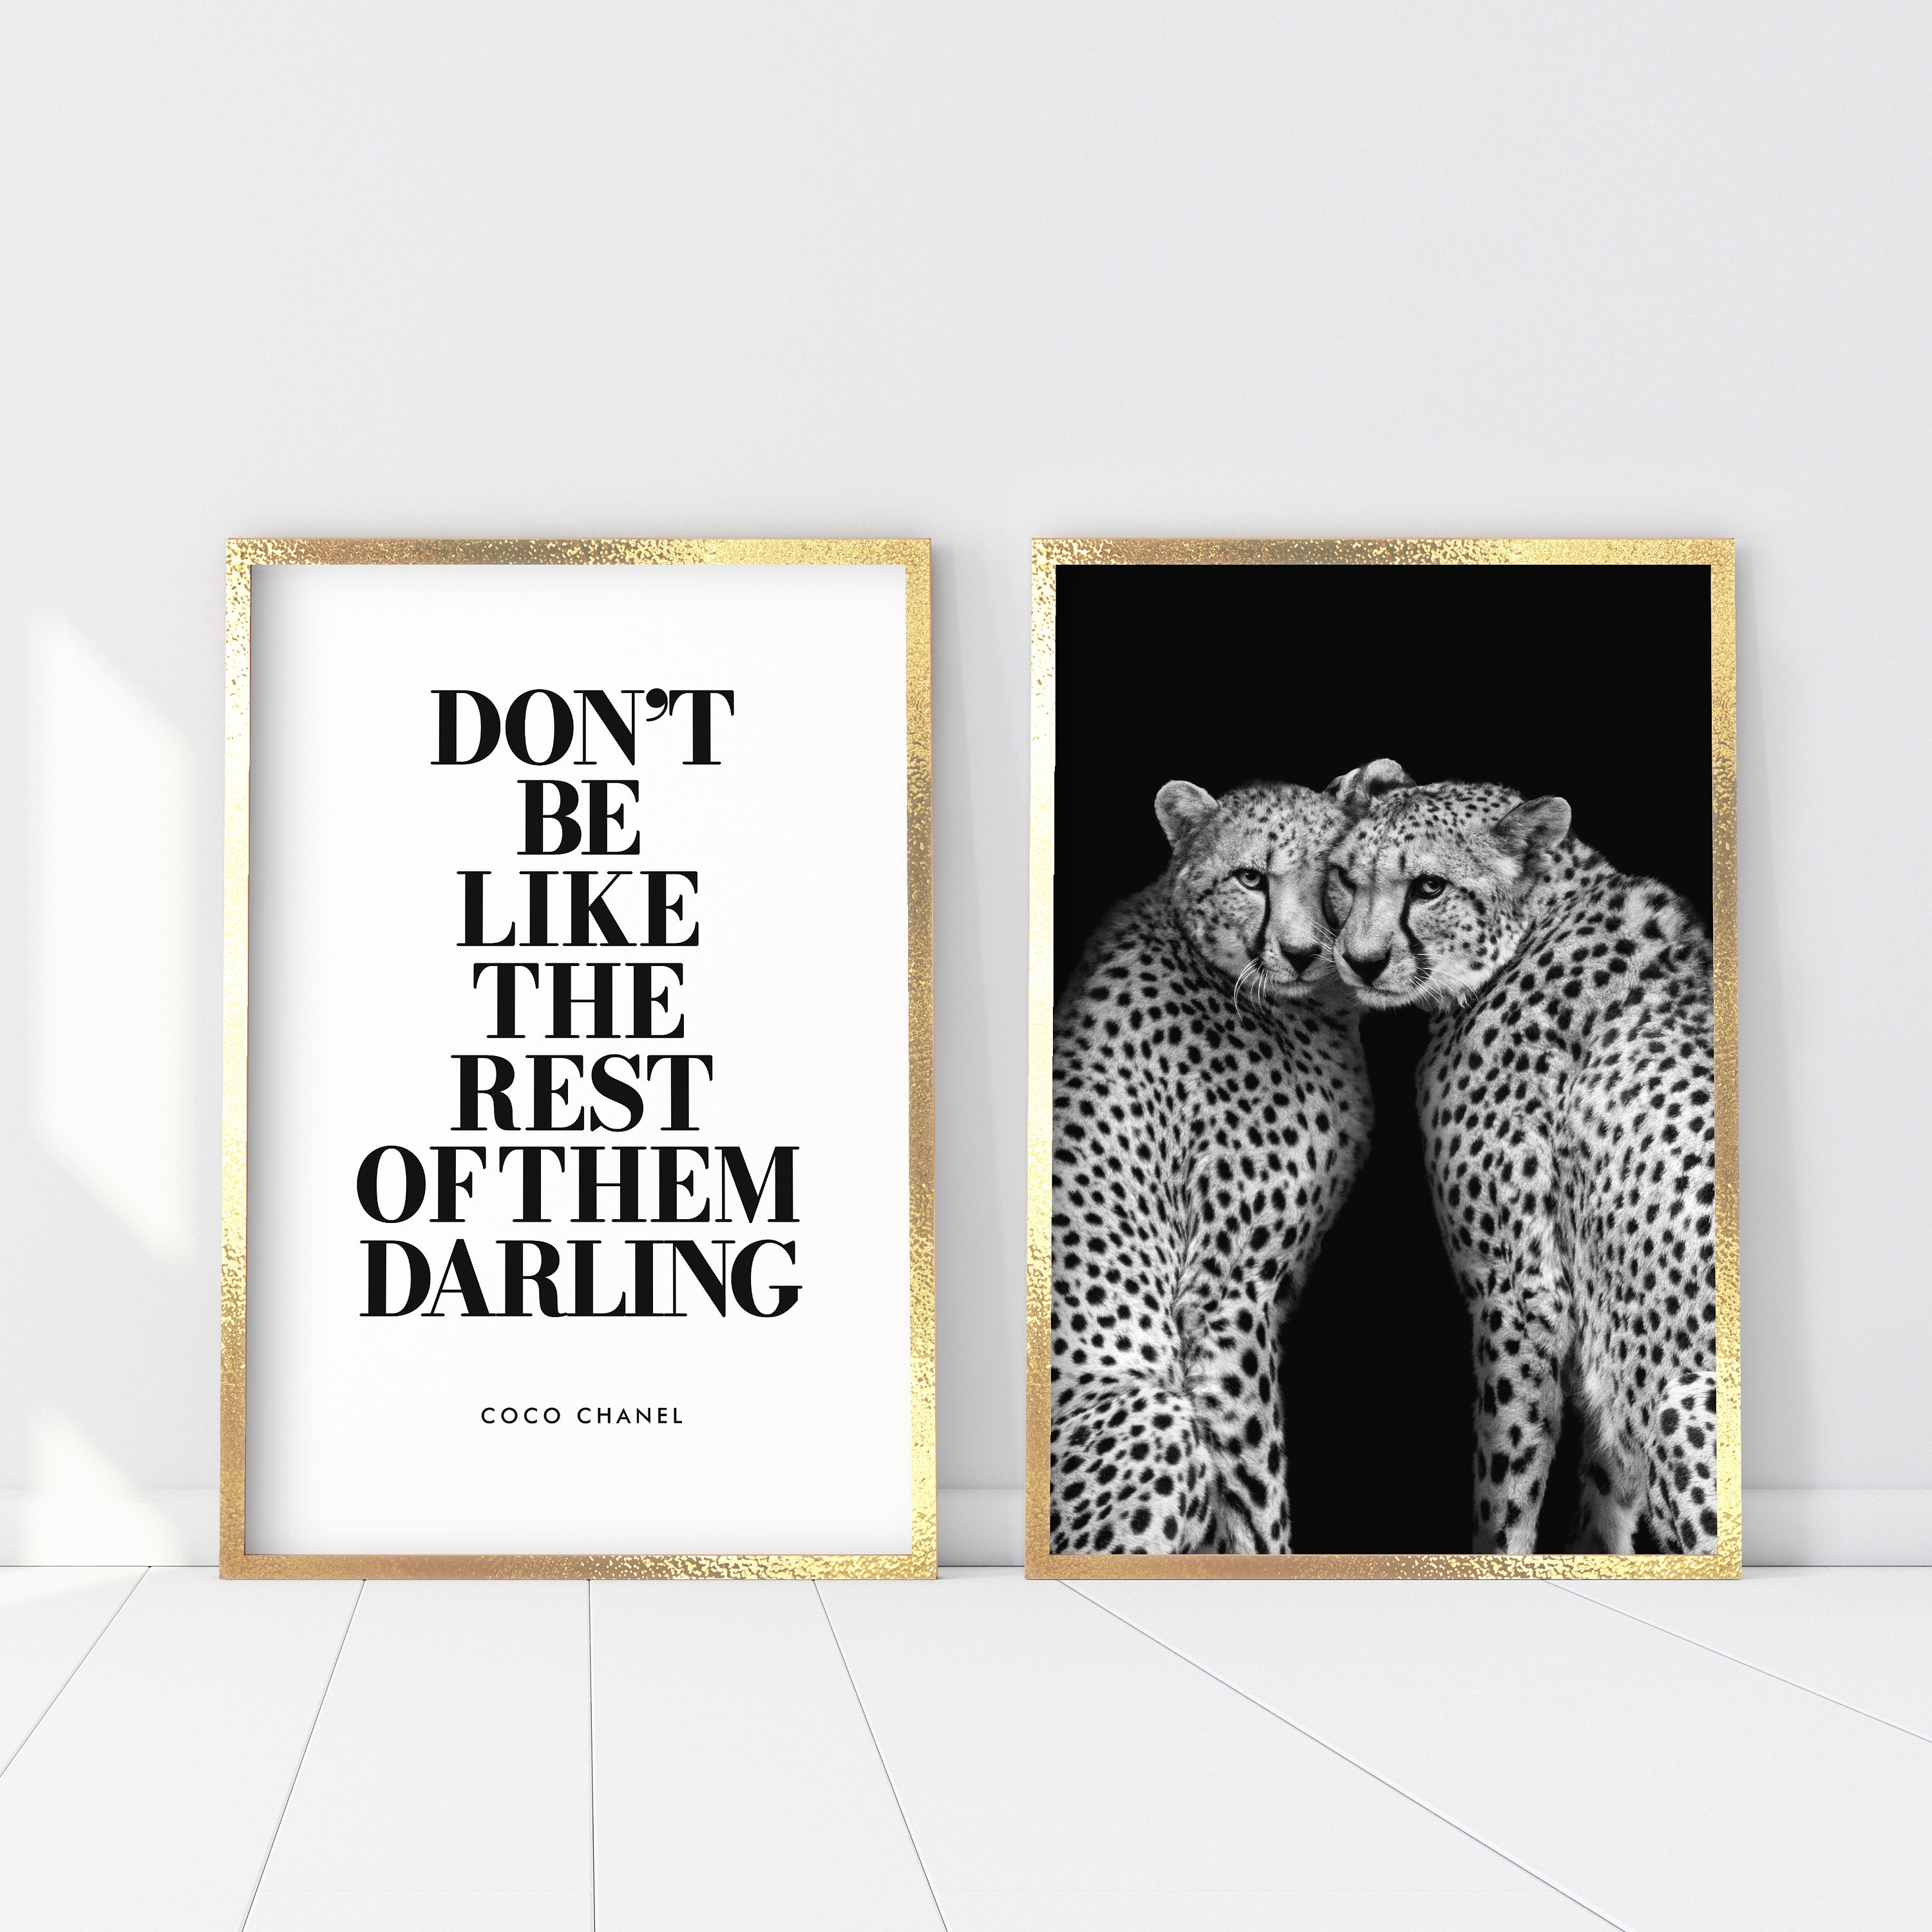  don't be like the rest of them darling Coco Chanel: 6X9  Journal, Lined Notebook, 110 Pages – Cute and Encouraging on Black with  Diamond on Back Cover for Women, Girls, Teen